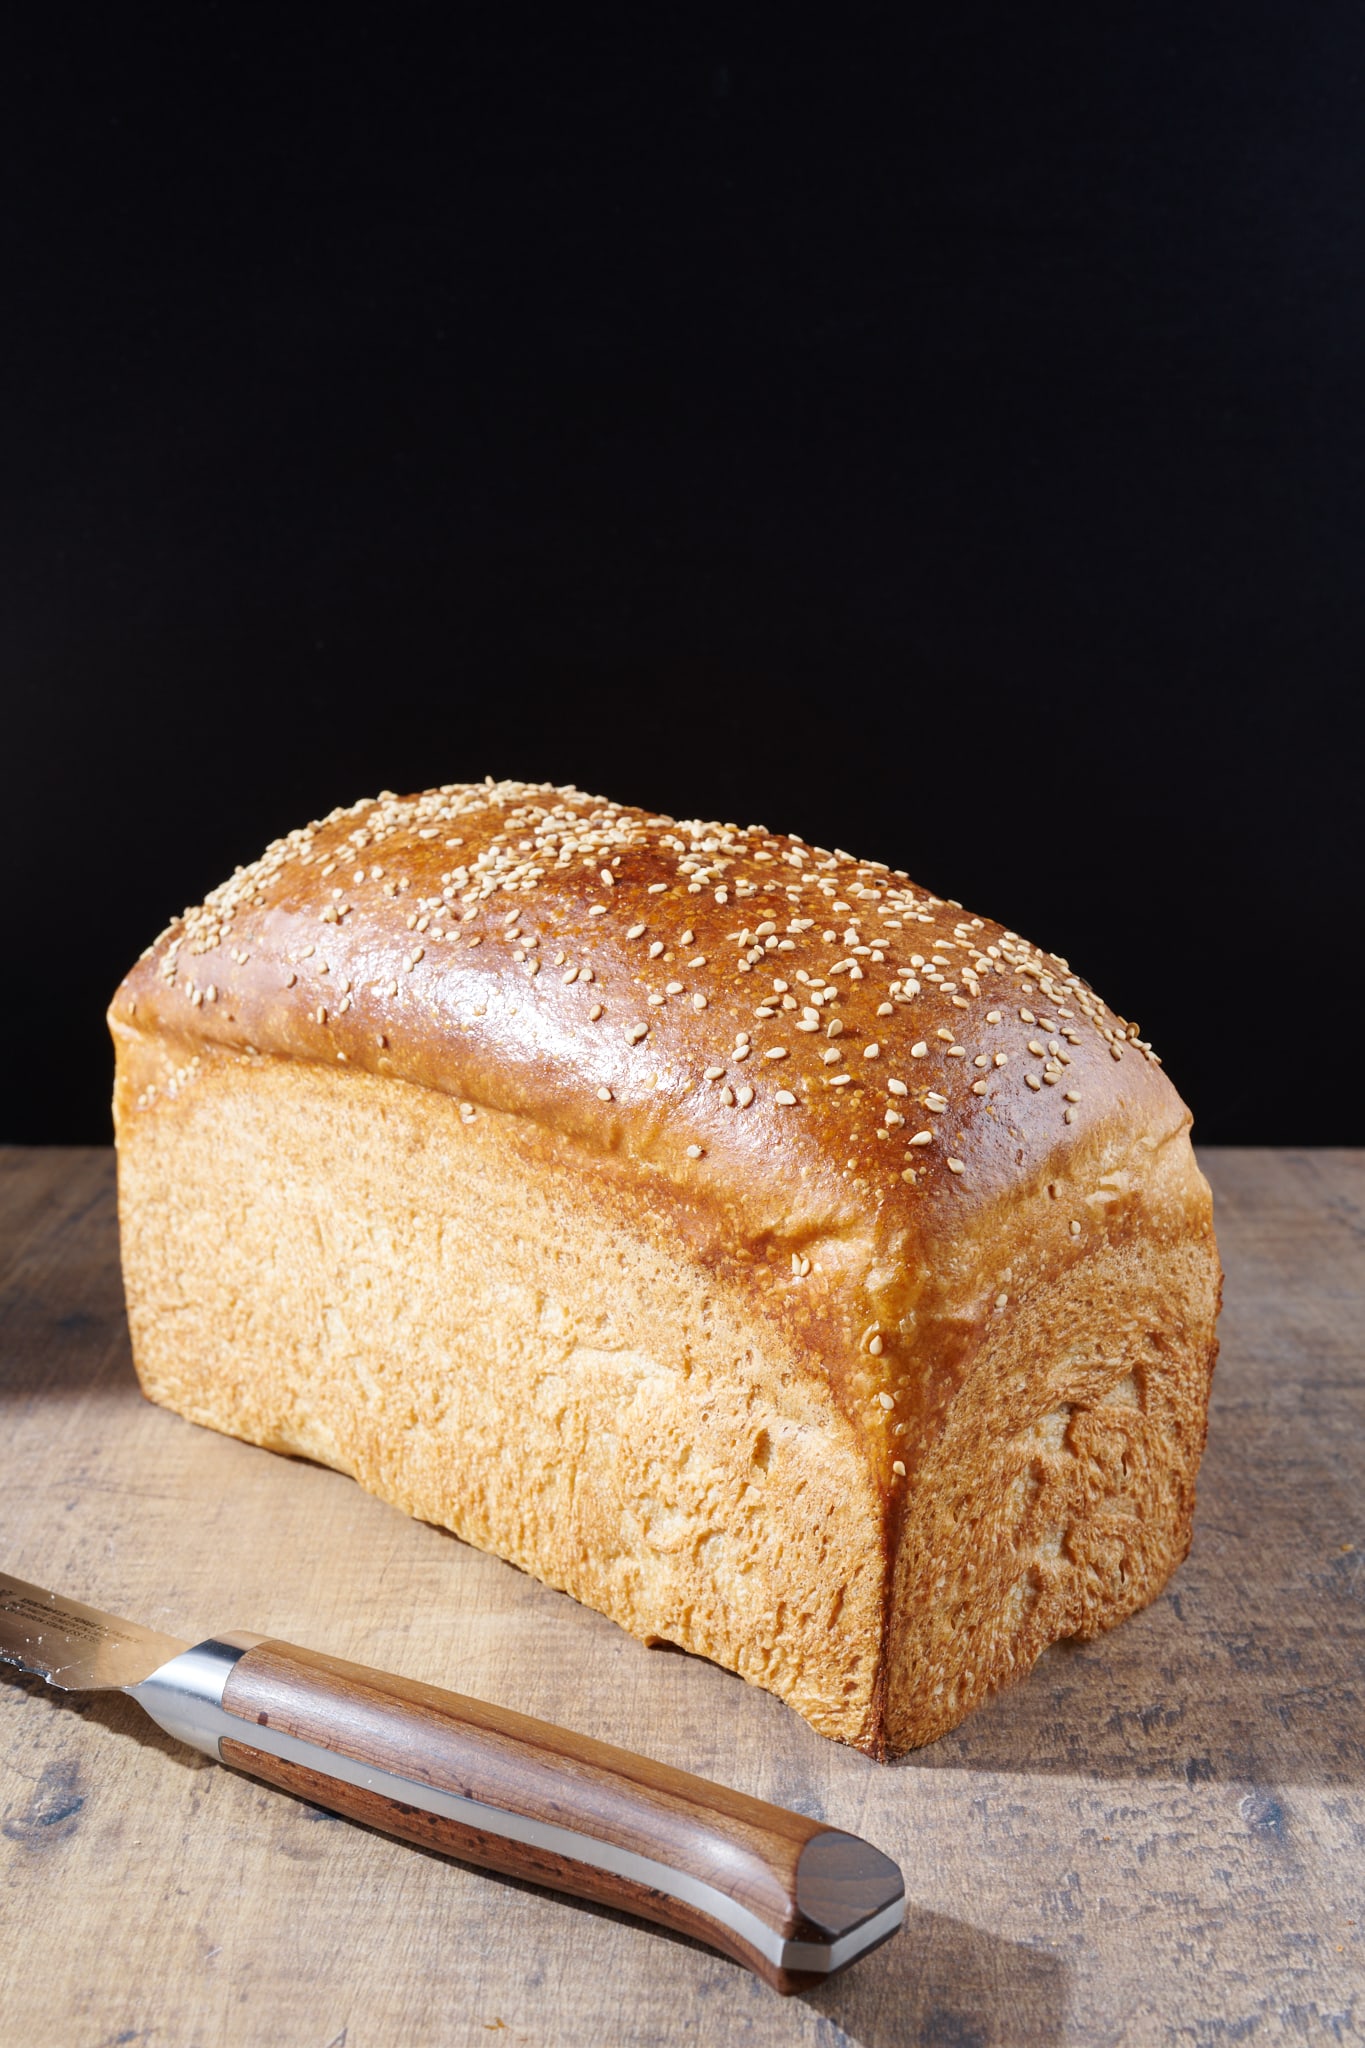 https://www.theperfectloaf.com/wp-content/uploads/2022/04/theperfectloaf_best_honey_whole_wheat_bread_recipe.jpg